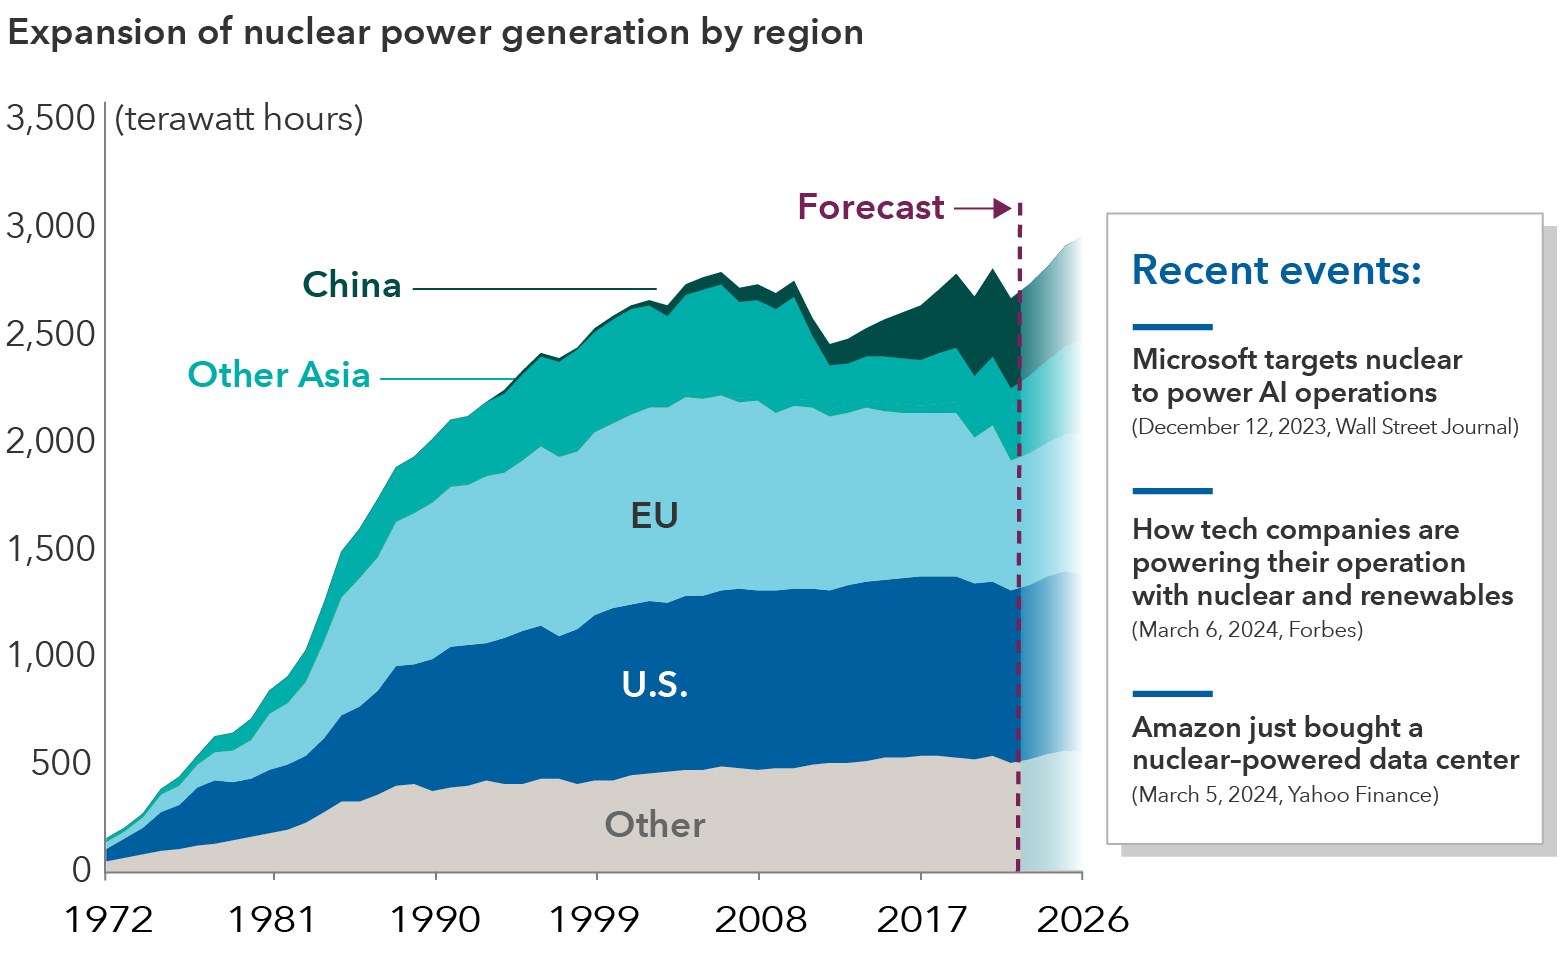 The mountain chart above shows nuclear power generation from 1972 until 2023 in terawatt hours and projections from 2024–2026 from the International Energy Agency. The x-axis shows the years, while the y-axis represents terawatt hours (TWh). The regions represented in the chart are China, other Asia countries, the European Union, the United States and other countries. From 1972 to 2017, the chart shows a steady increase in nuclear power generation across the European Union, United States and Other countries, while China and Other Asia experienced a drop off after 2008 before rising again. For the forecasted period of 2024-2026, it’s expected that China will add the most nuclear power and for global nuclear power generation to reach near 3,000 TWh. On the right side of the image, there’s a box listing three headlines about companies investing in nuclear power for operations. They are as follows: “Microsoft targets nuclear to power AI operations,” from the Wall Street Journal on December 12, 2023. The second is “How tech companies are powering their operation with nuclear and renewables,” from Forbes on March 6, 2024. The final is “Amazon just bought a nuclear-powered data center,” from Yahoo Finance on March 5, 2024. 